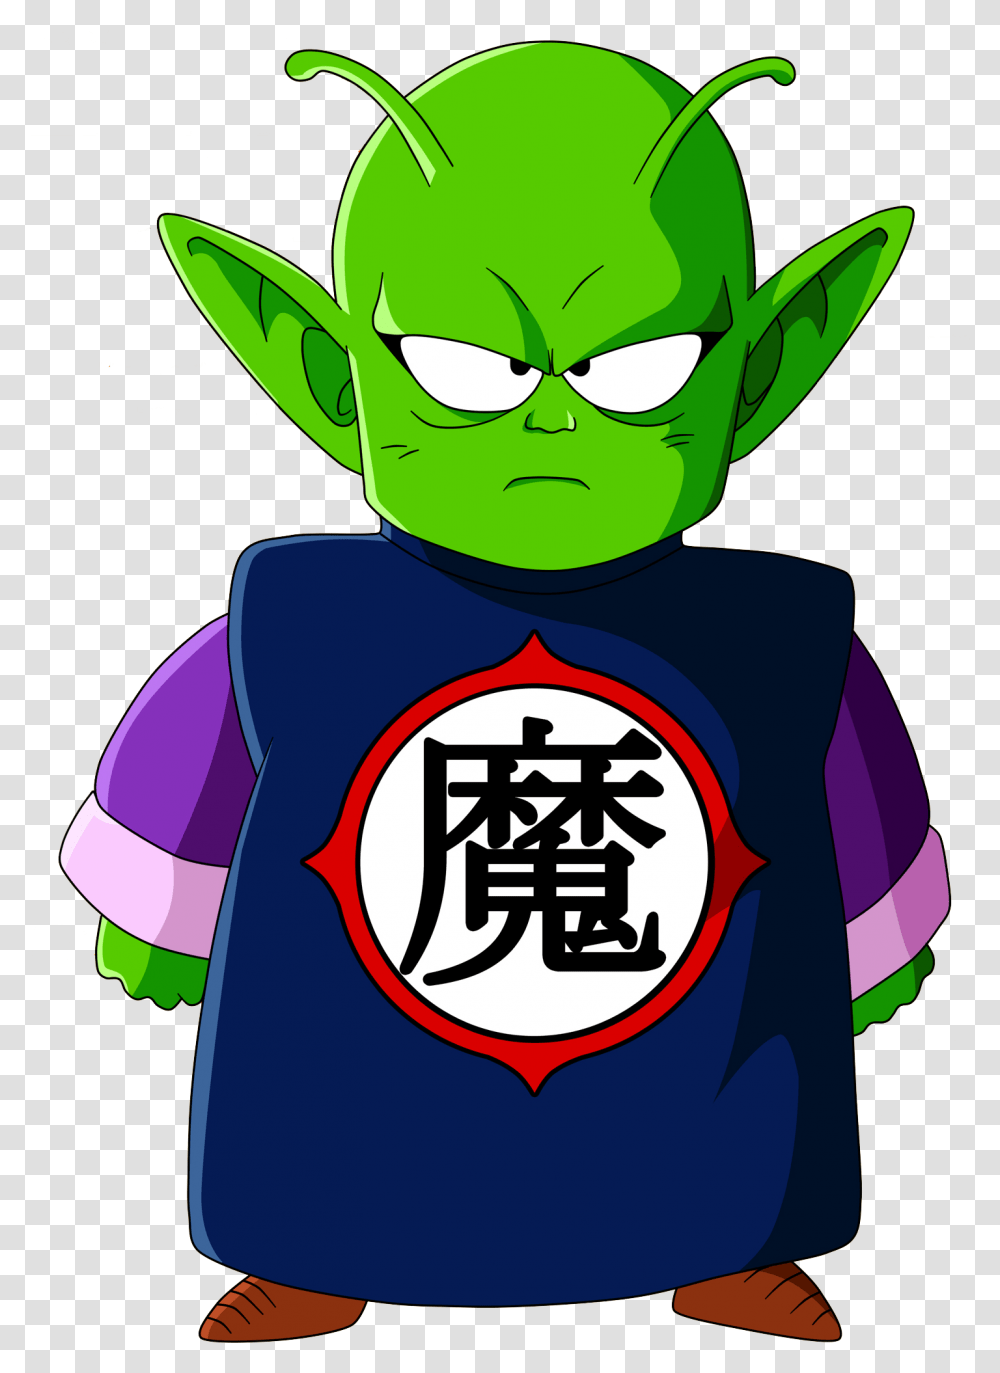 Villains Fanon Wiki Kid Piccolo, Green, Recycling Symbol Transparent Png